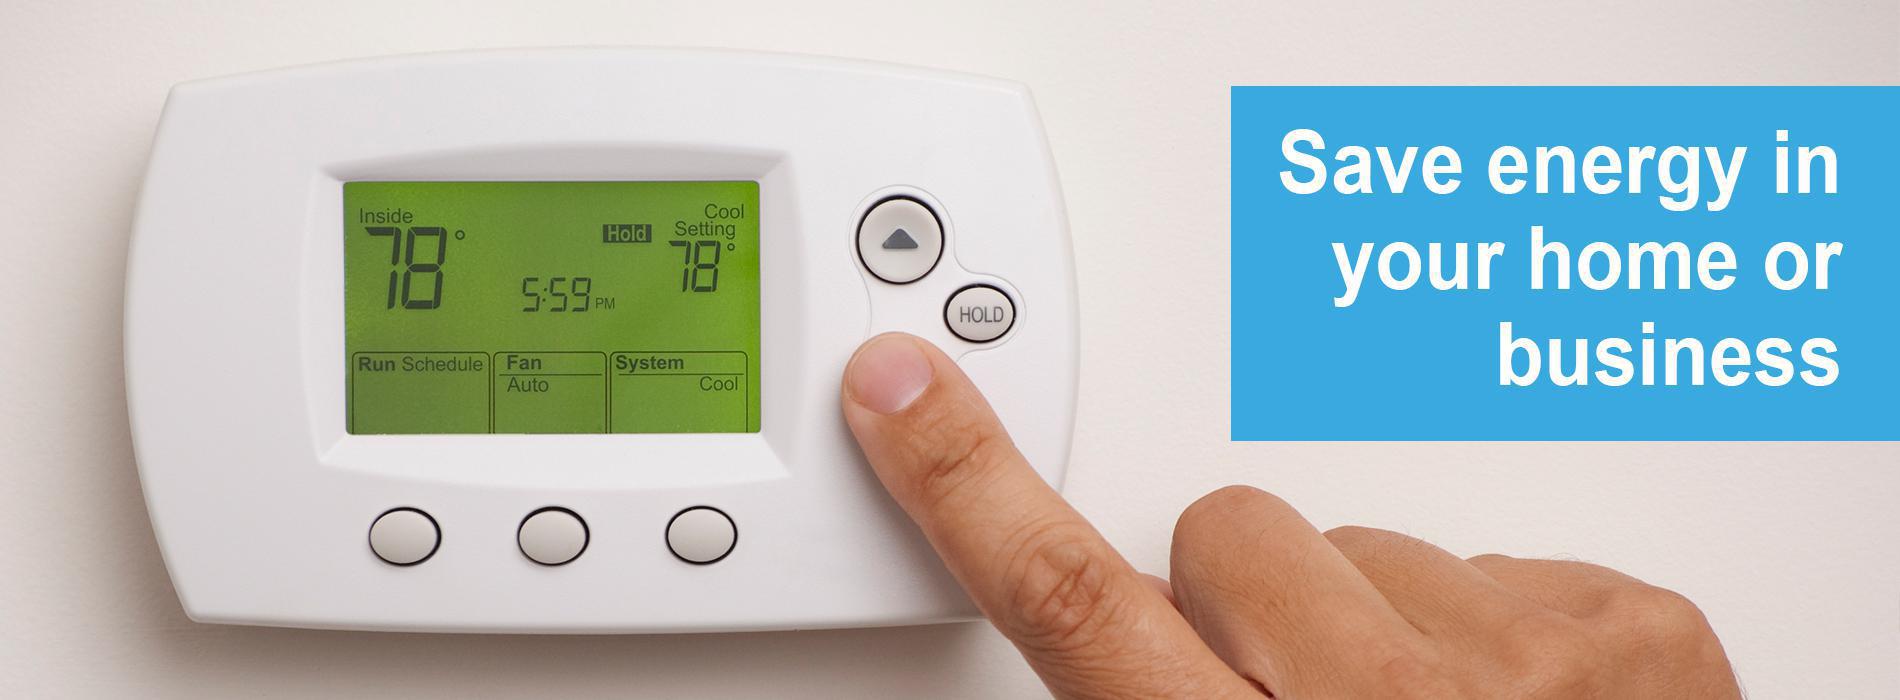 Finger turning down the thermostat with words saying "Save energy in your home or business"